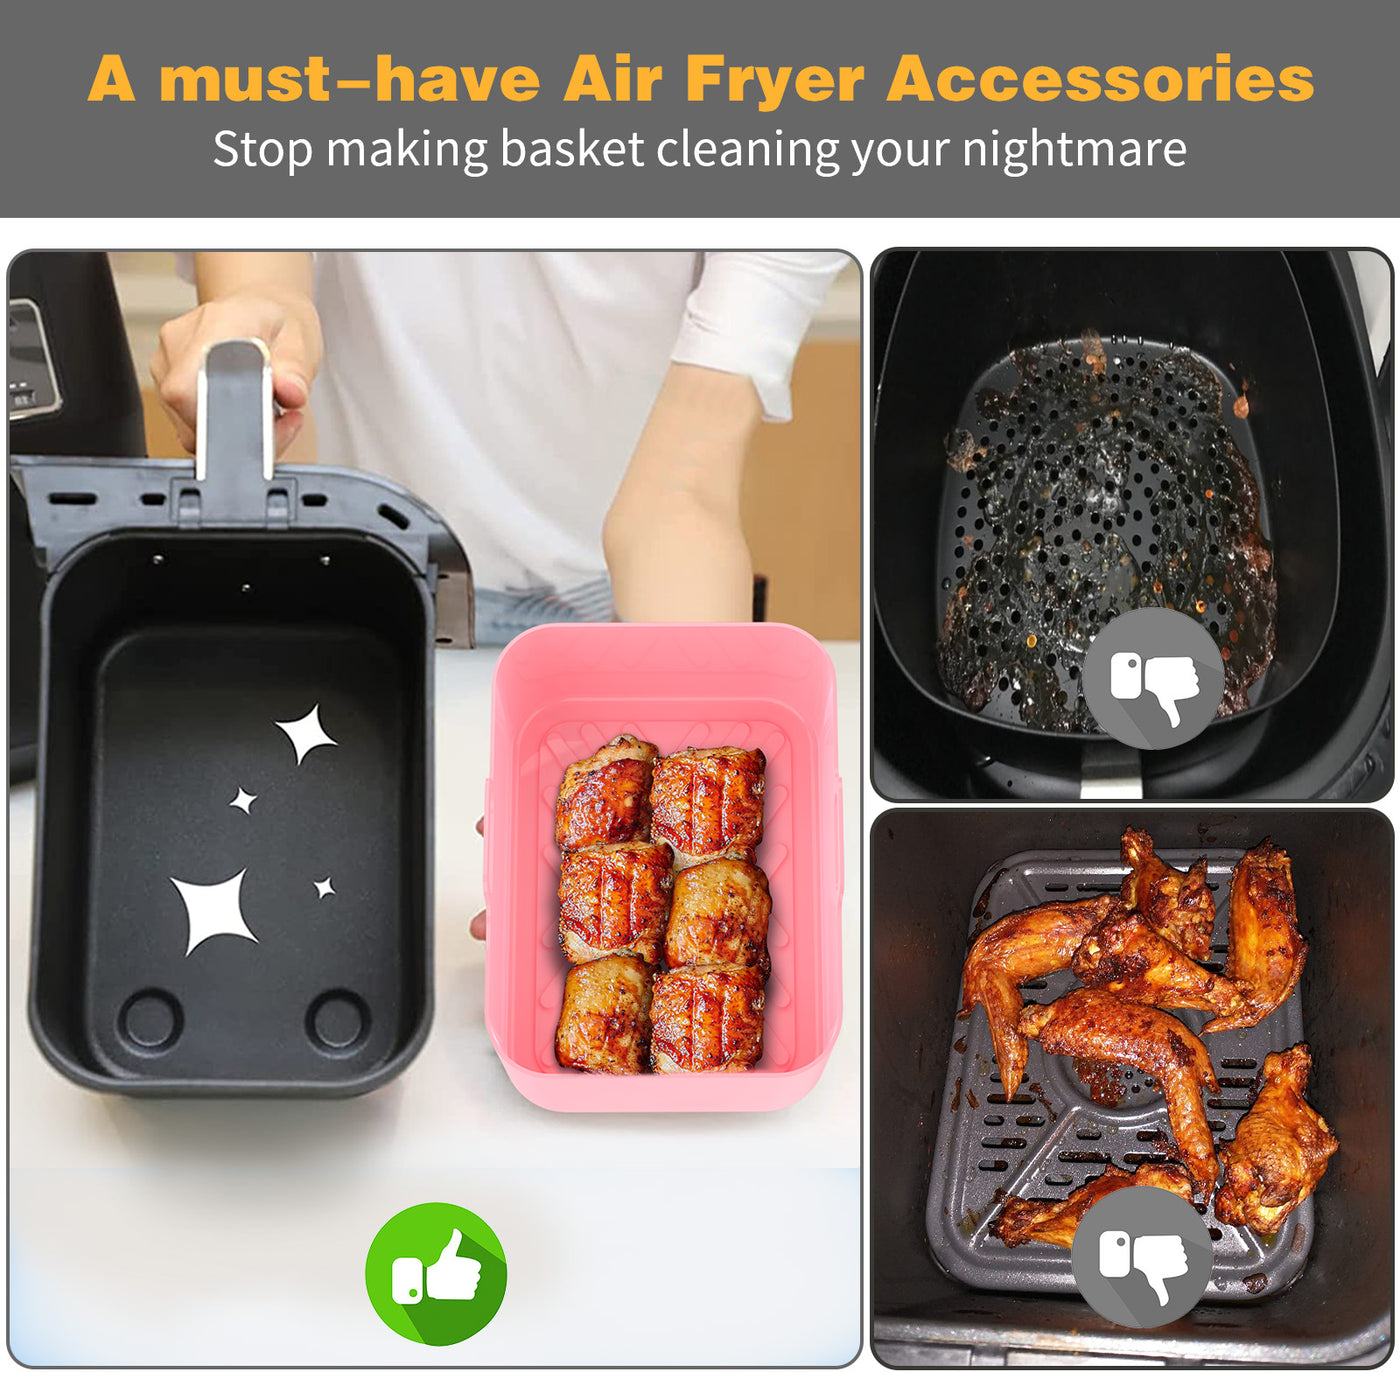 OUTXE 2-Pack 10 QT Silicone Air Fryer Liners for Ninja Dual Zone DZ401